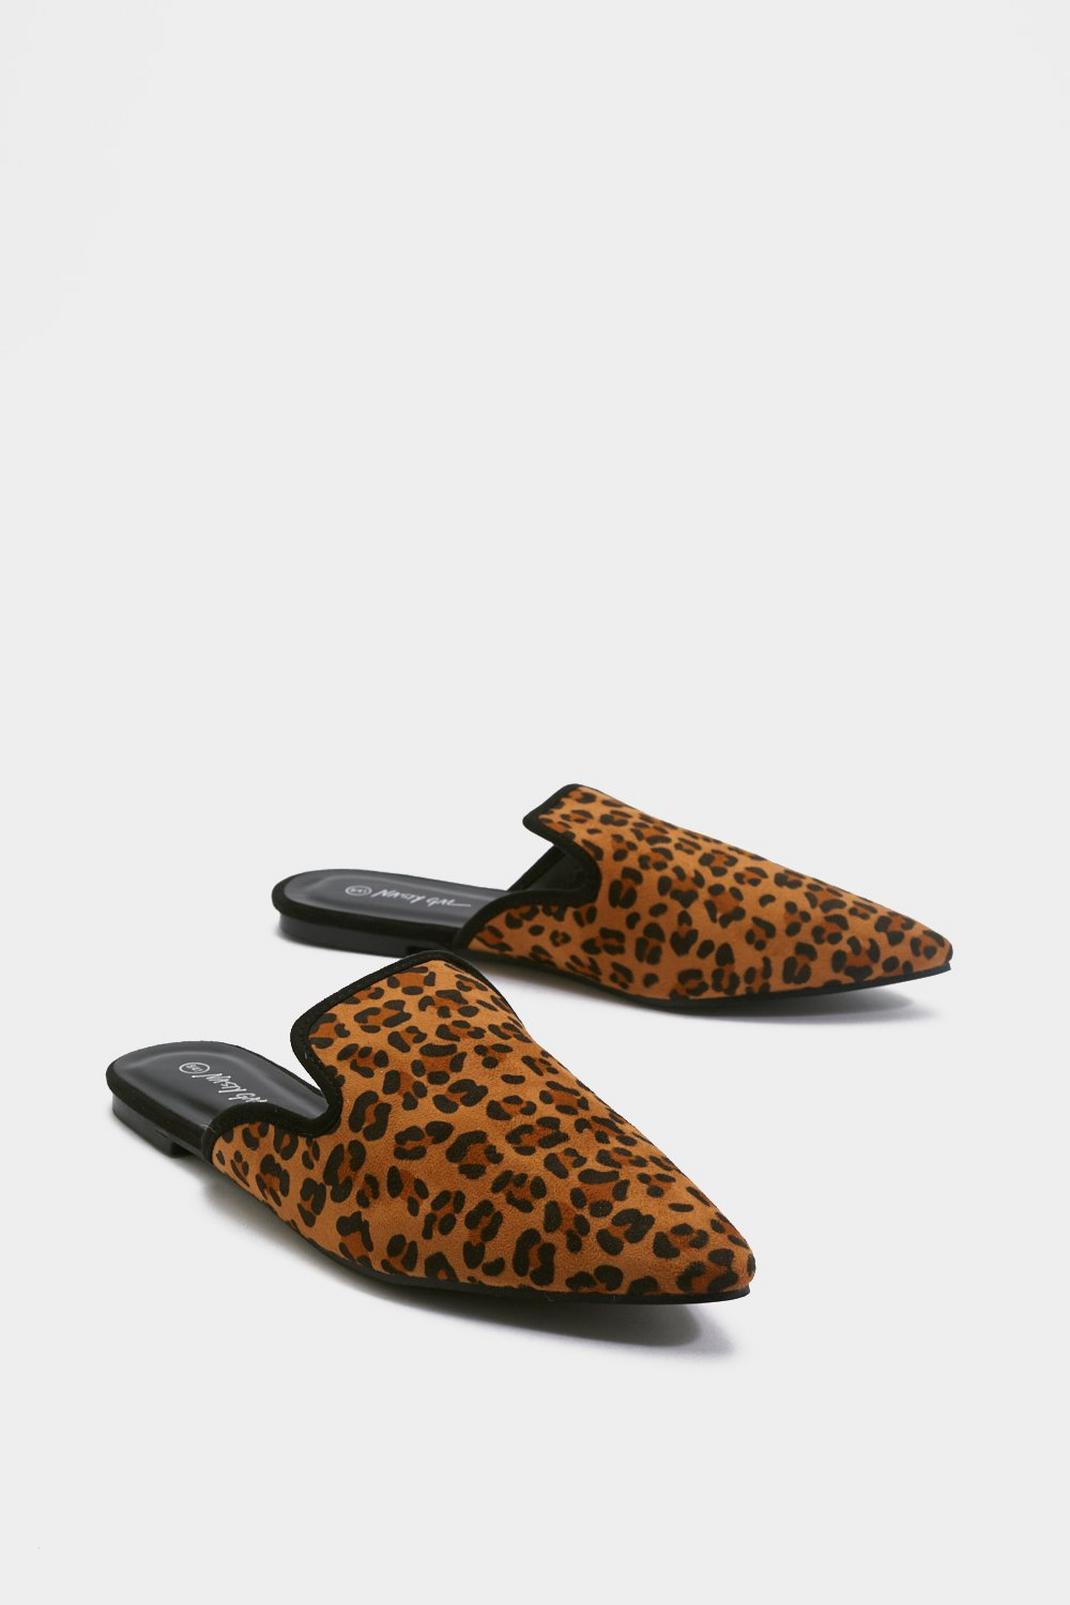 As Soon As Paw-sible Leopard Mules image number 1